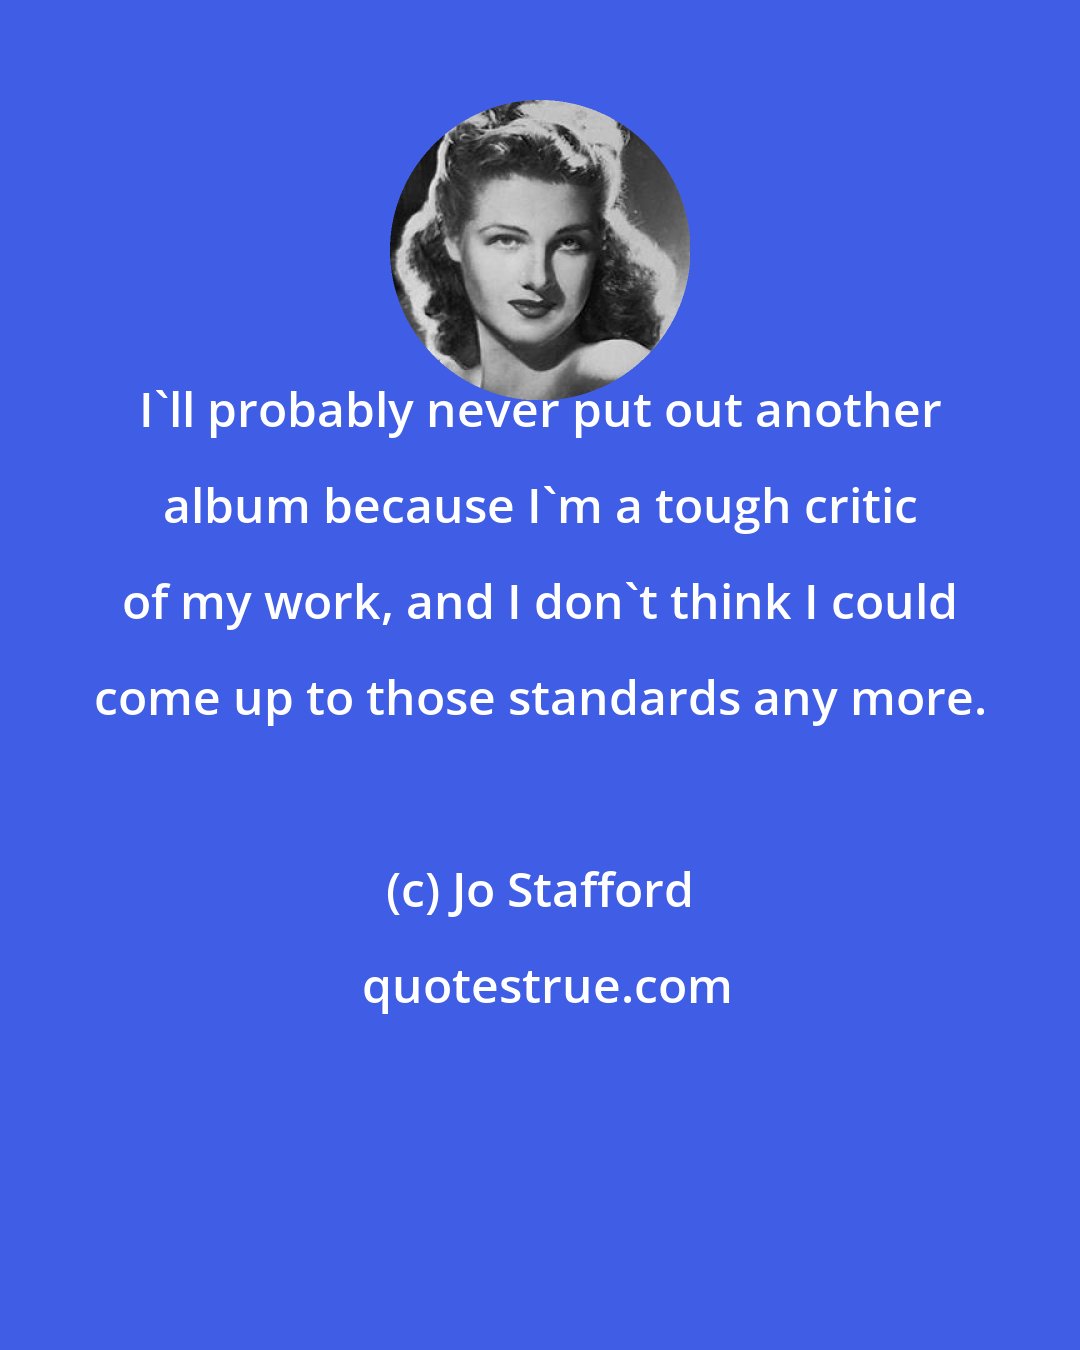 Jo Stafford: I'll probably never put out another album because I'm a tough critic of my work, and I don't think I could come up to those standards any more.